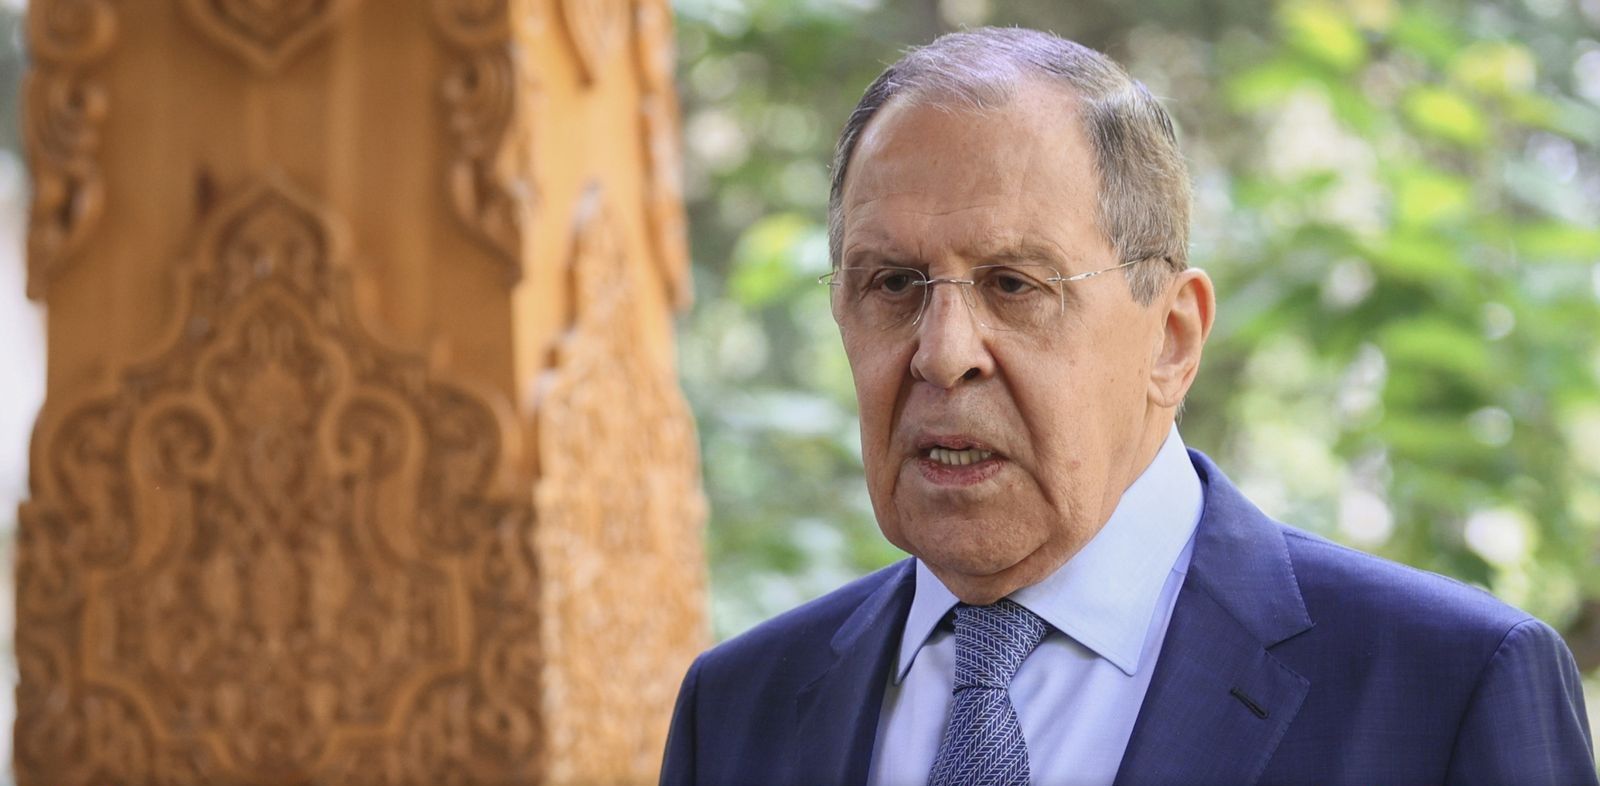 West has declared 'total hybrid war' on Russia, claims Lavrov - as Putin warns Finland against joining NATO